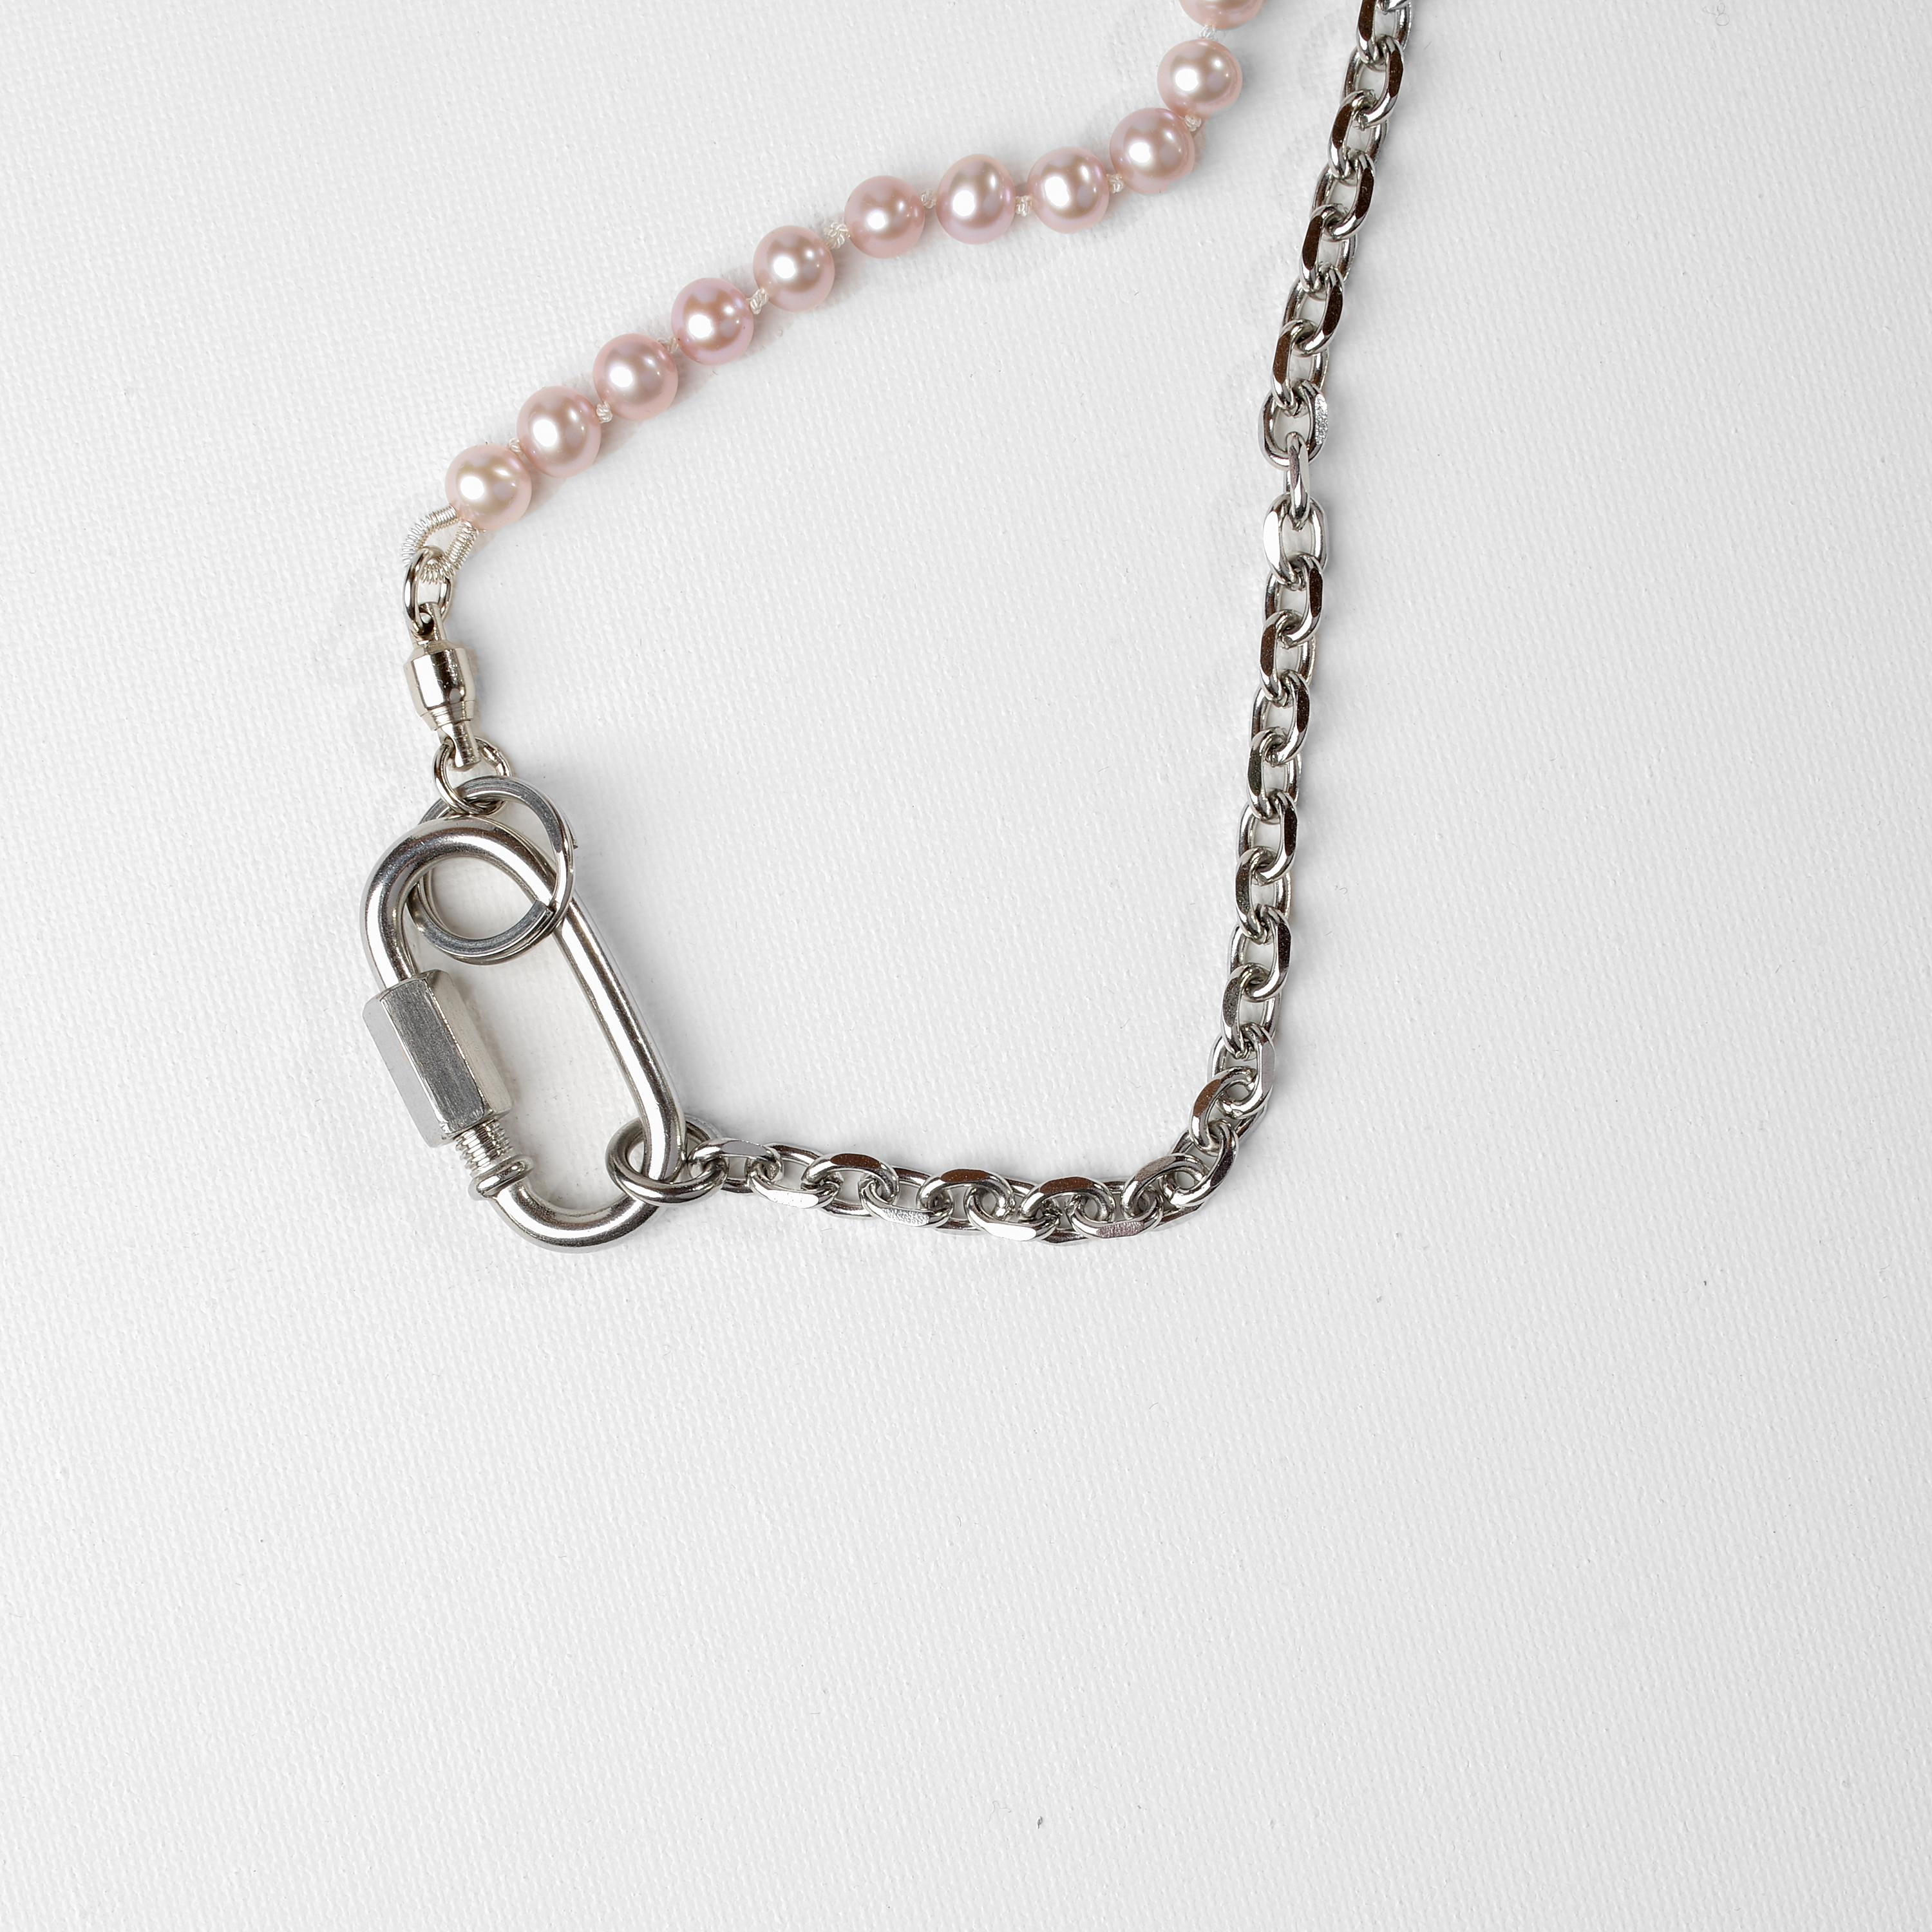 This one-of-a-kind necklace was created by PEARL/SAW, creator of 